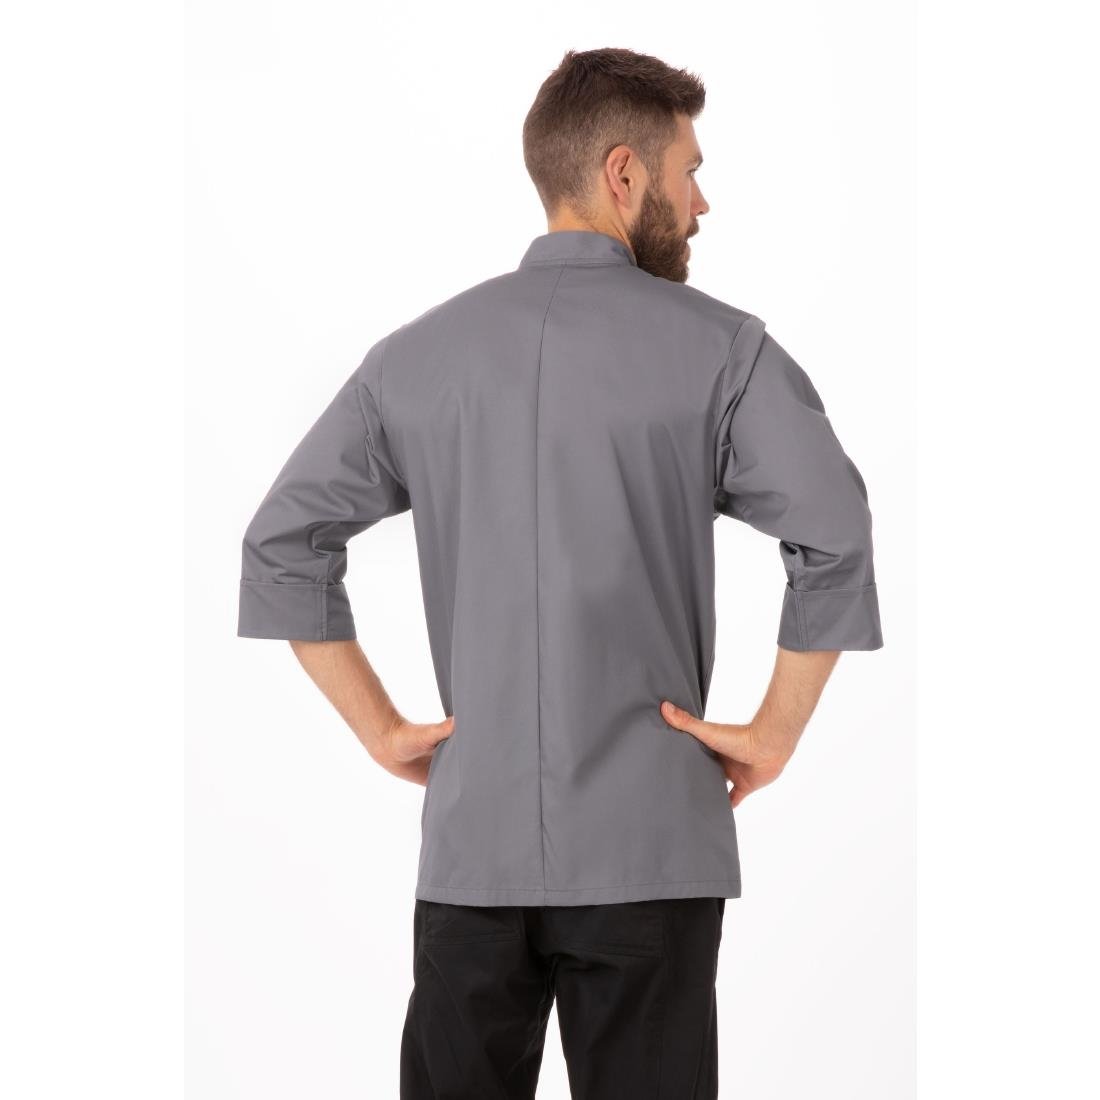 A934-M Chef Works Unisex Chefs Jacket Grey M JD Catering Equipment Solutions Ltd